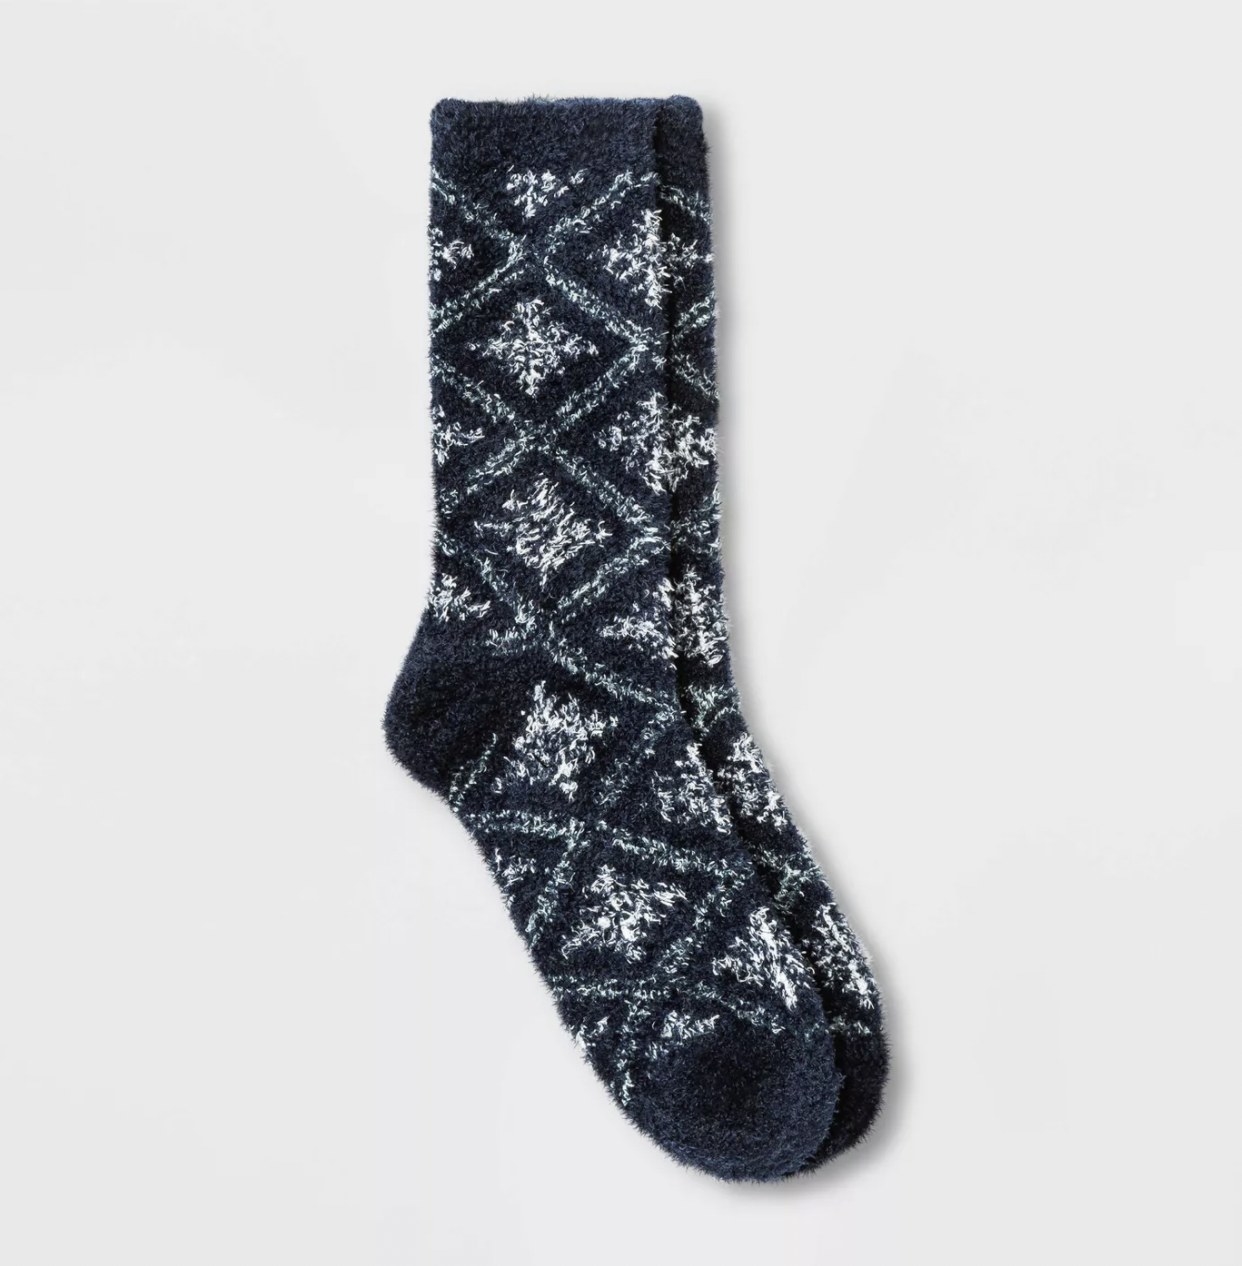 The blue socks with white snowflakes in diamonds